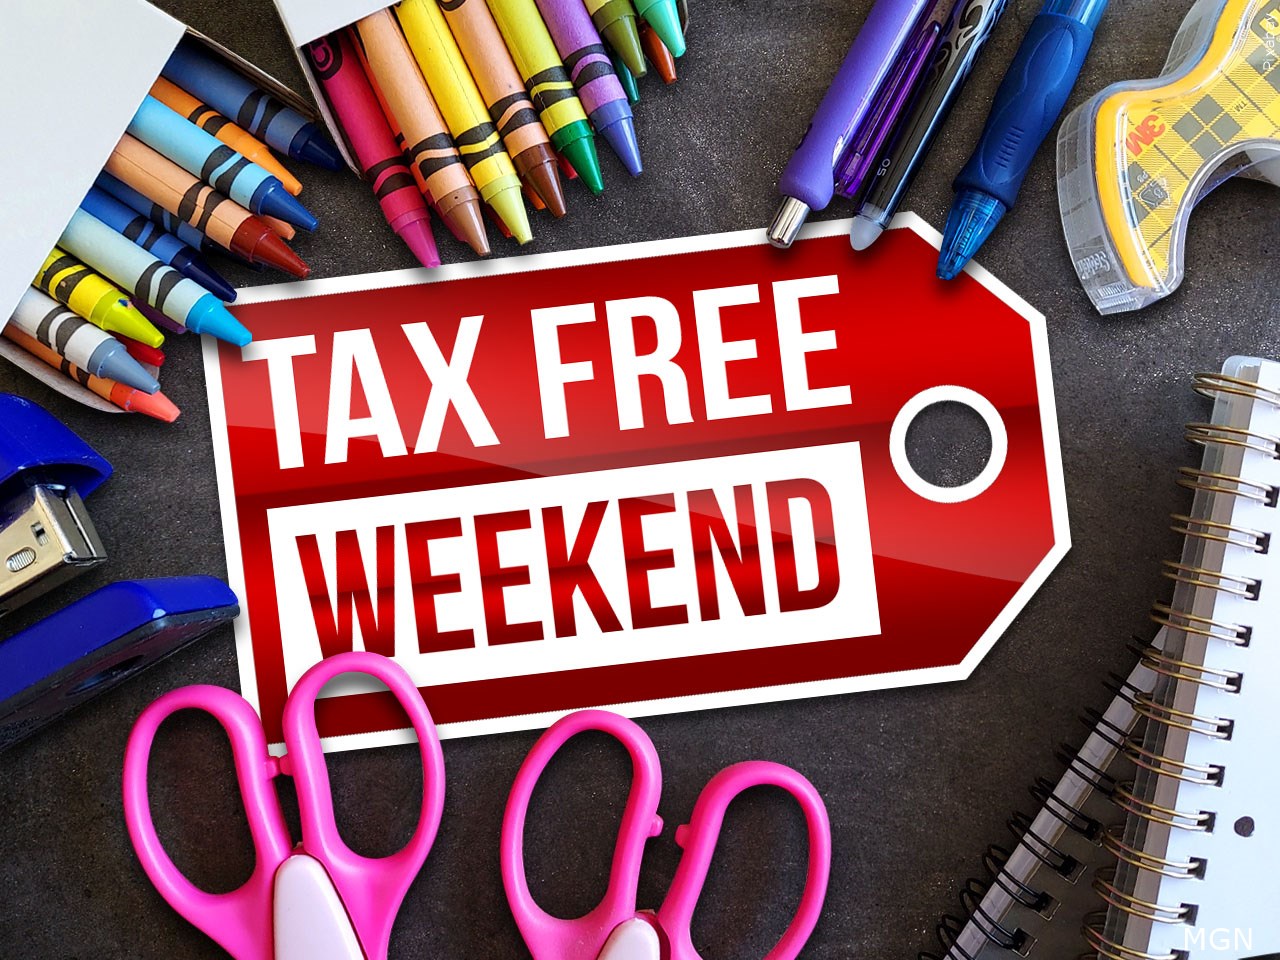 Mississippi Tax Free Weekend will include school supplies